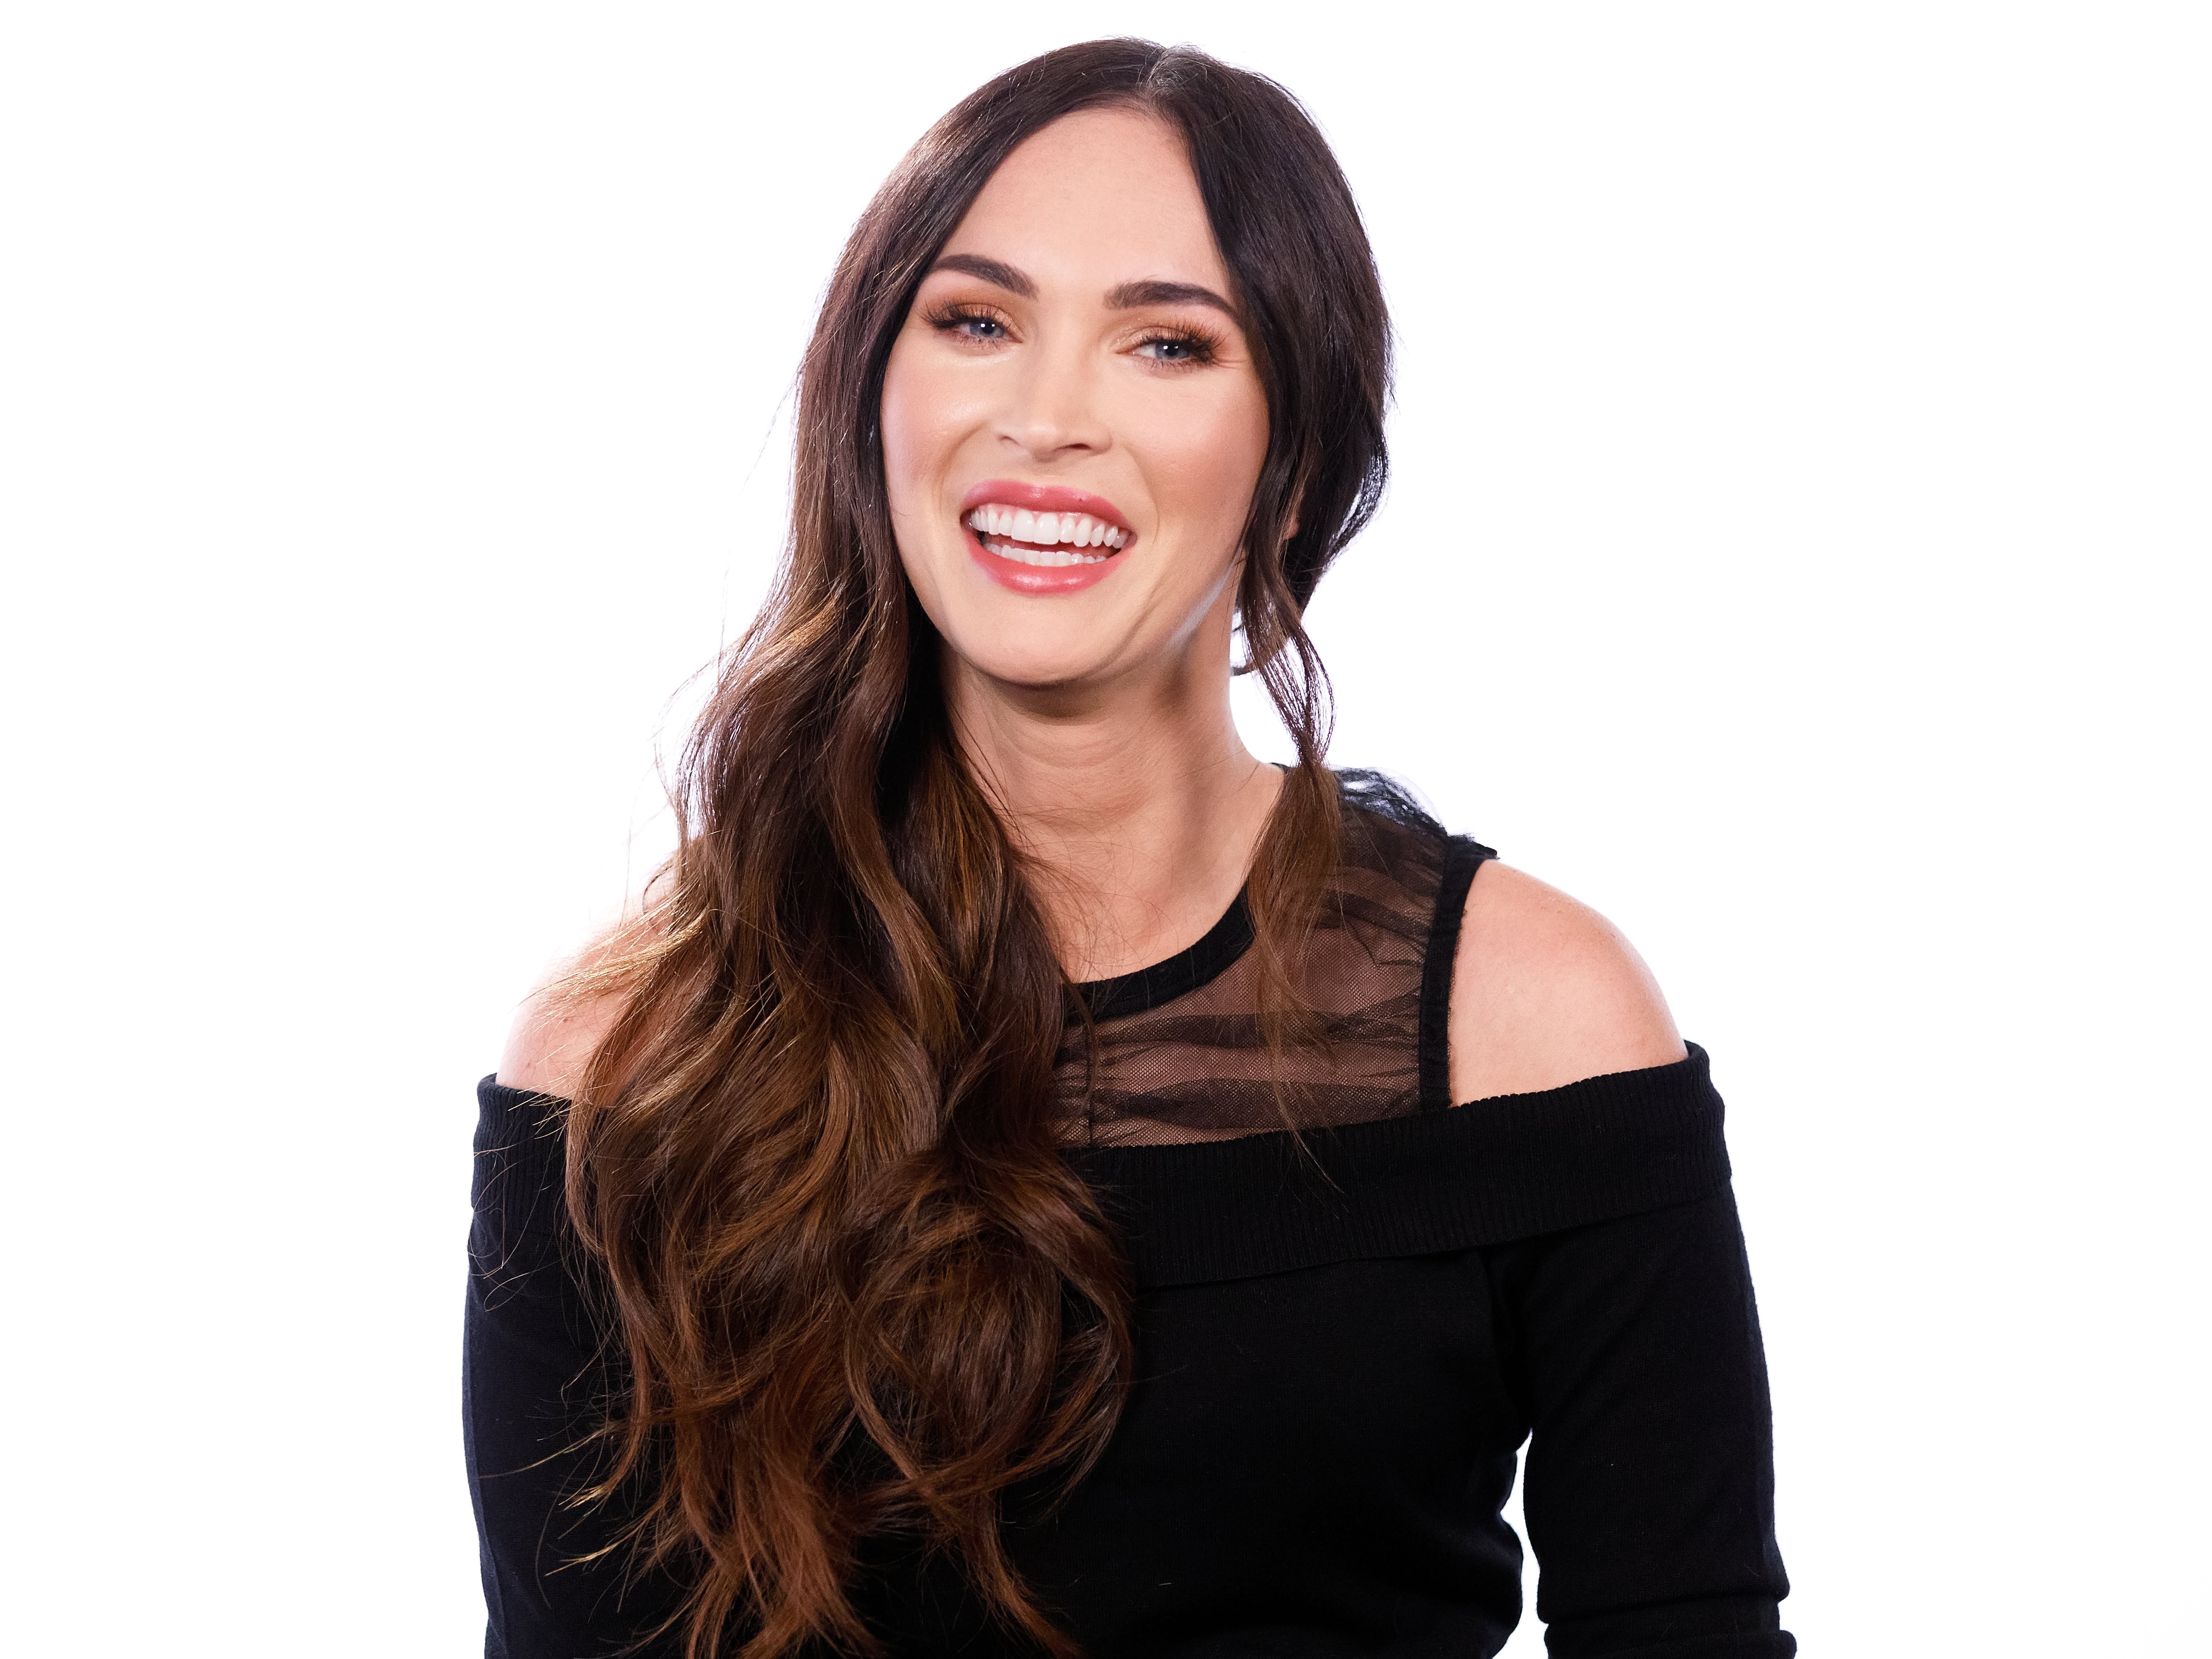 Megan Fox compares her latest outfit to a grandmother’s couch